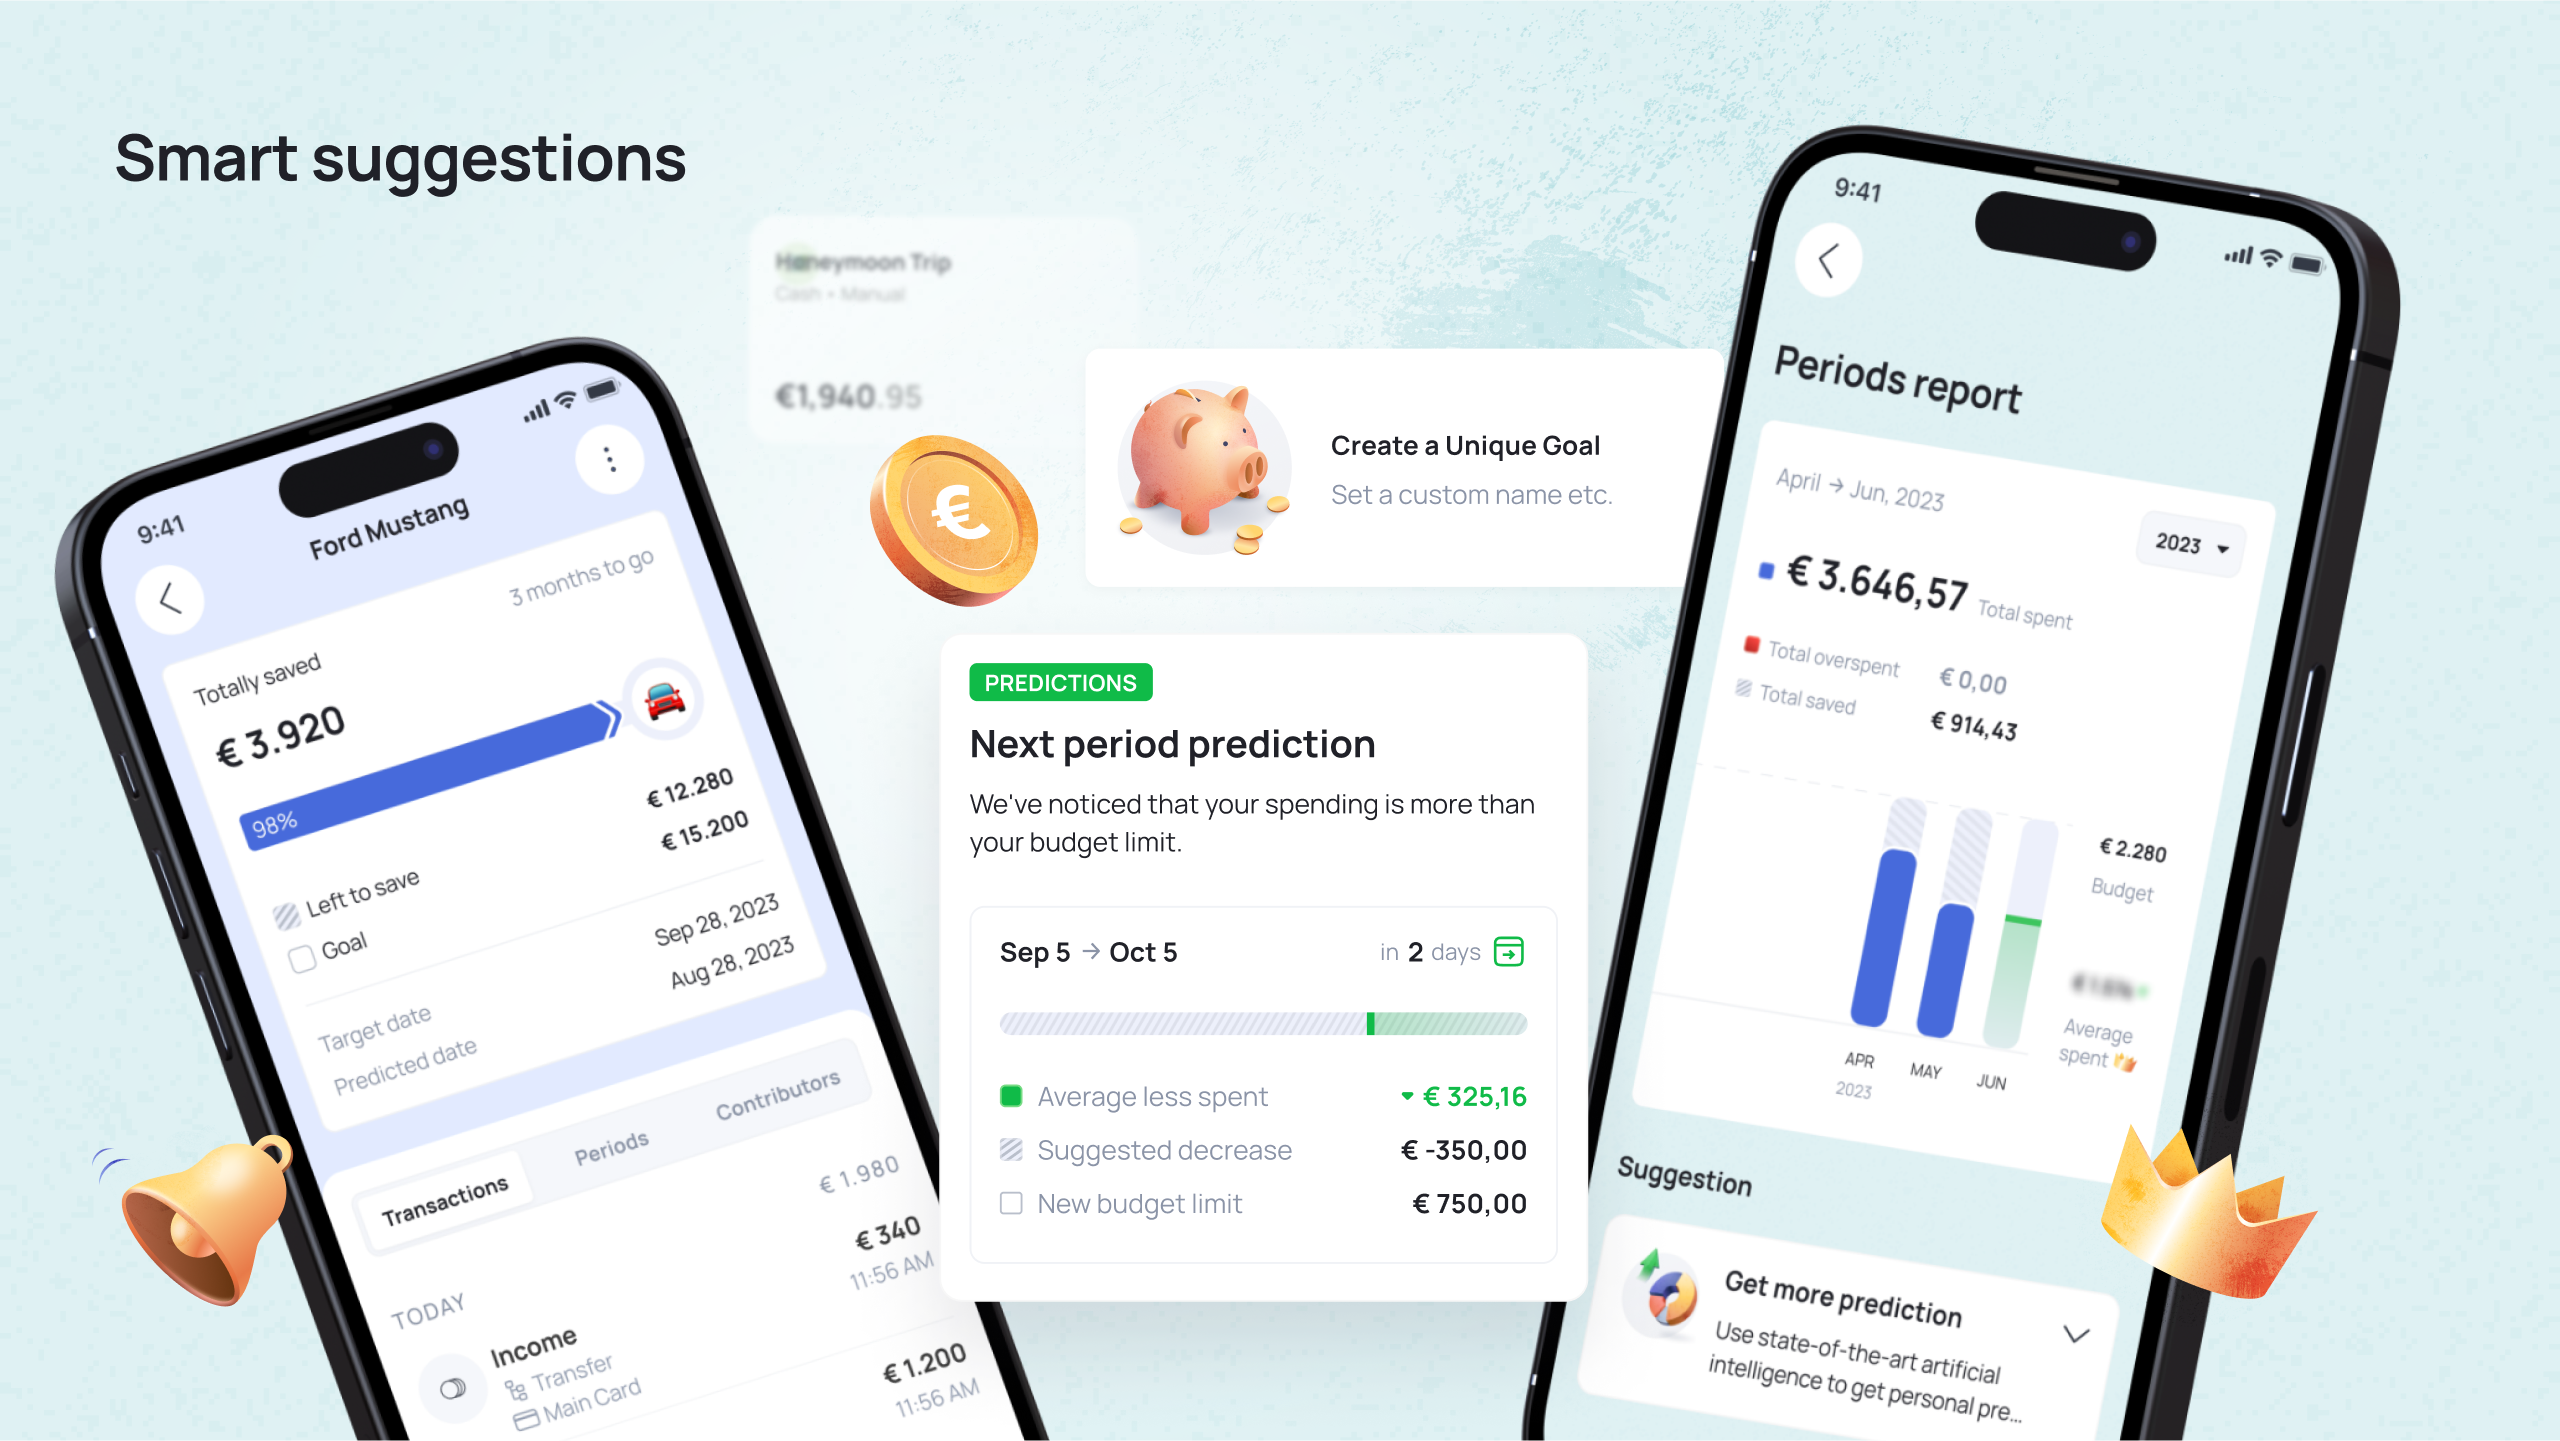 iBilly - Personal finance made easy